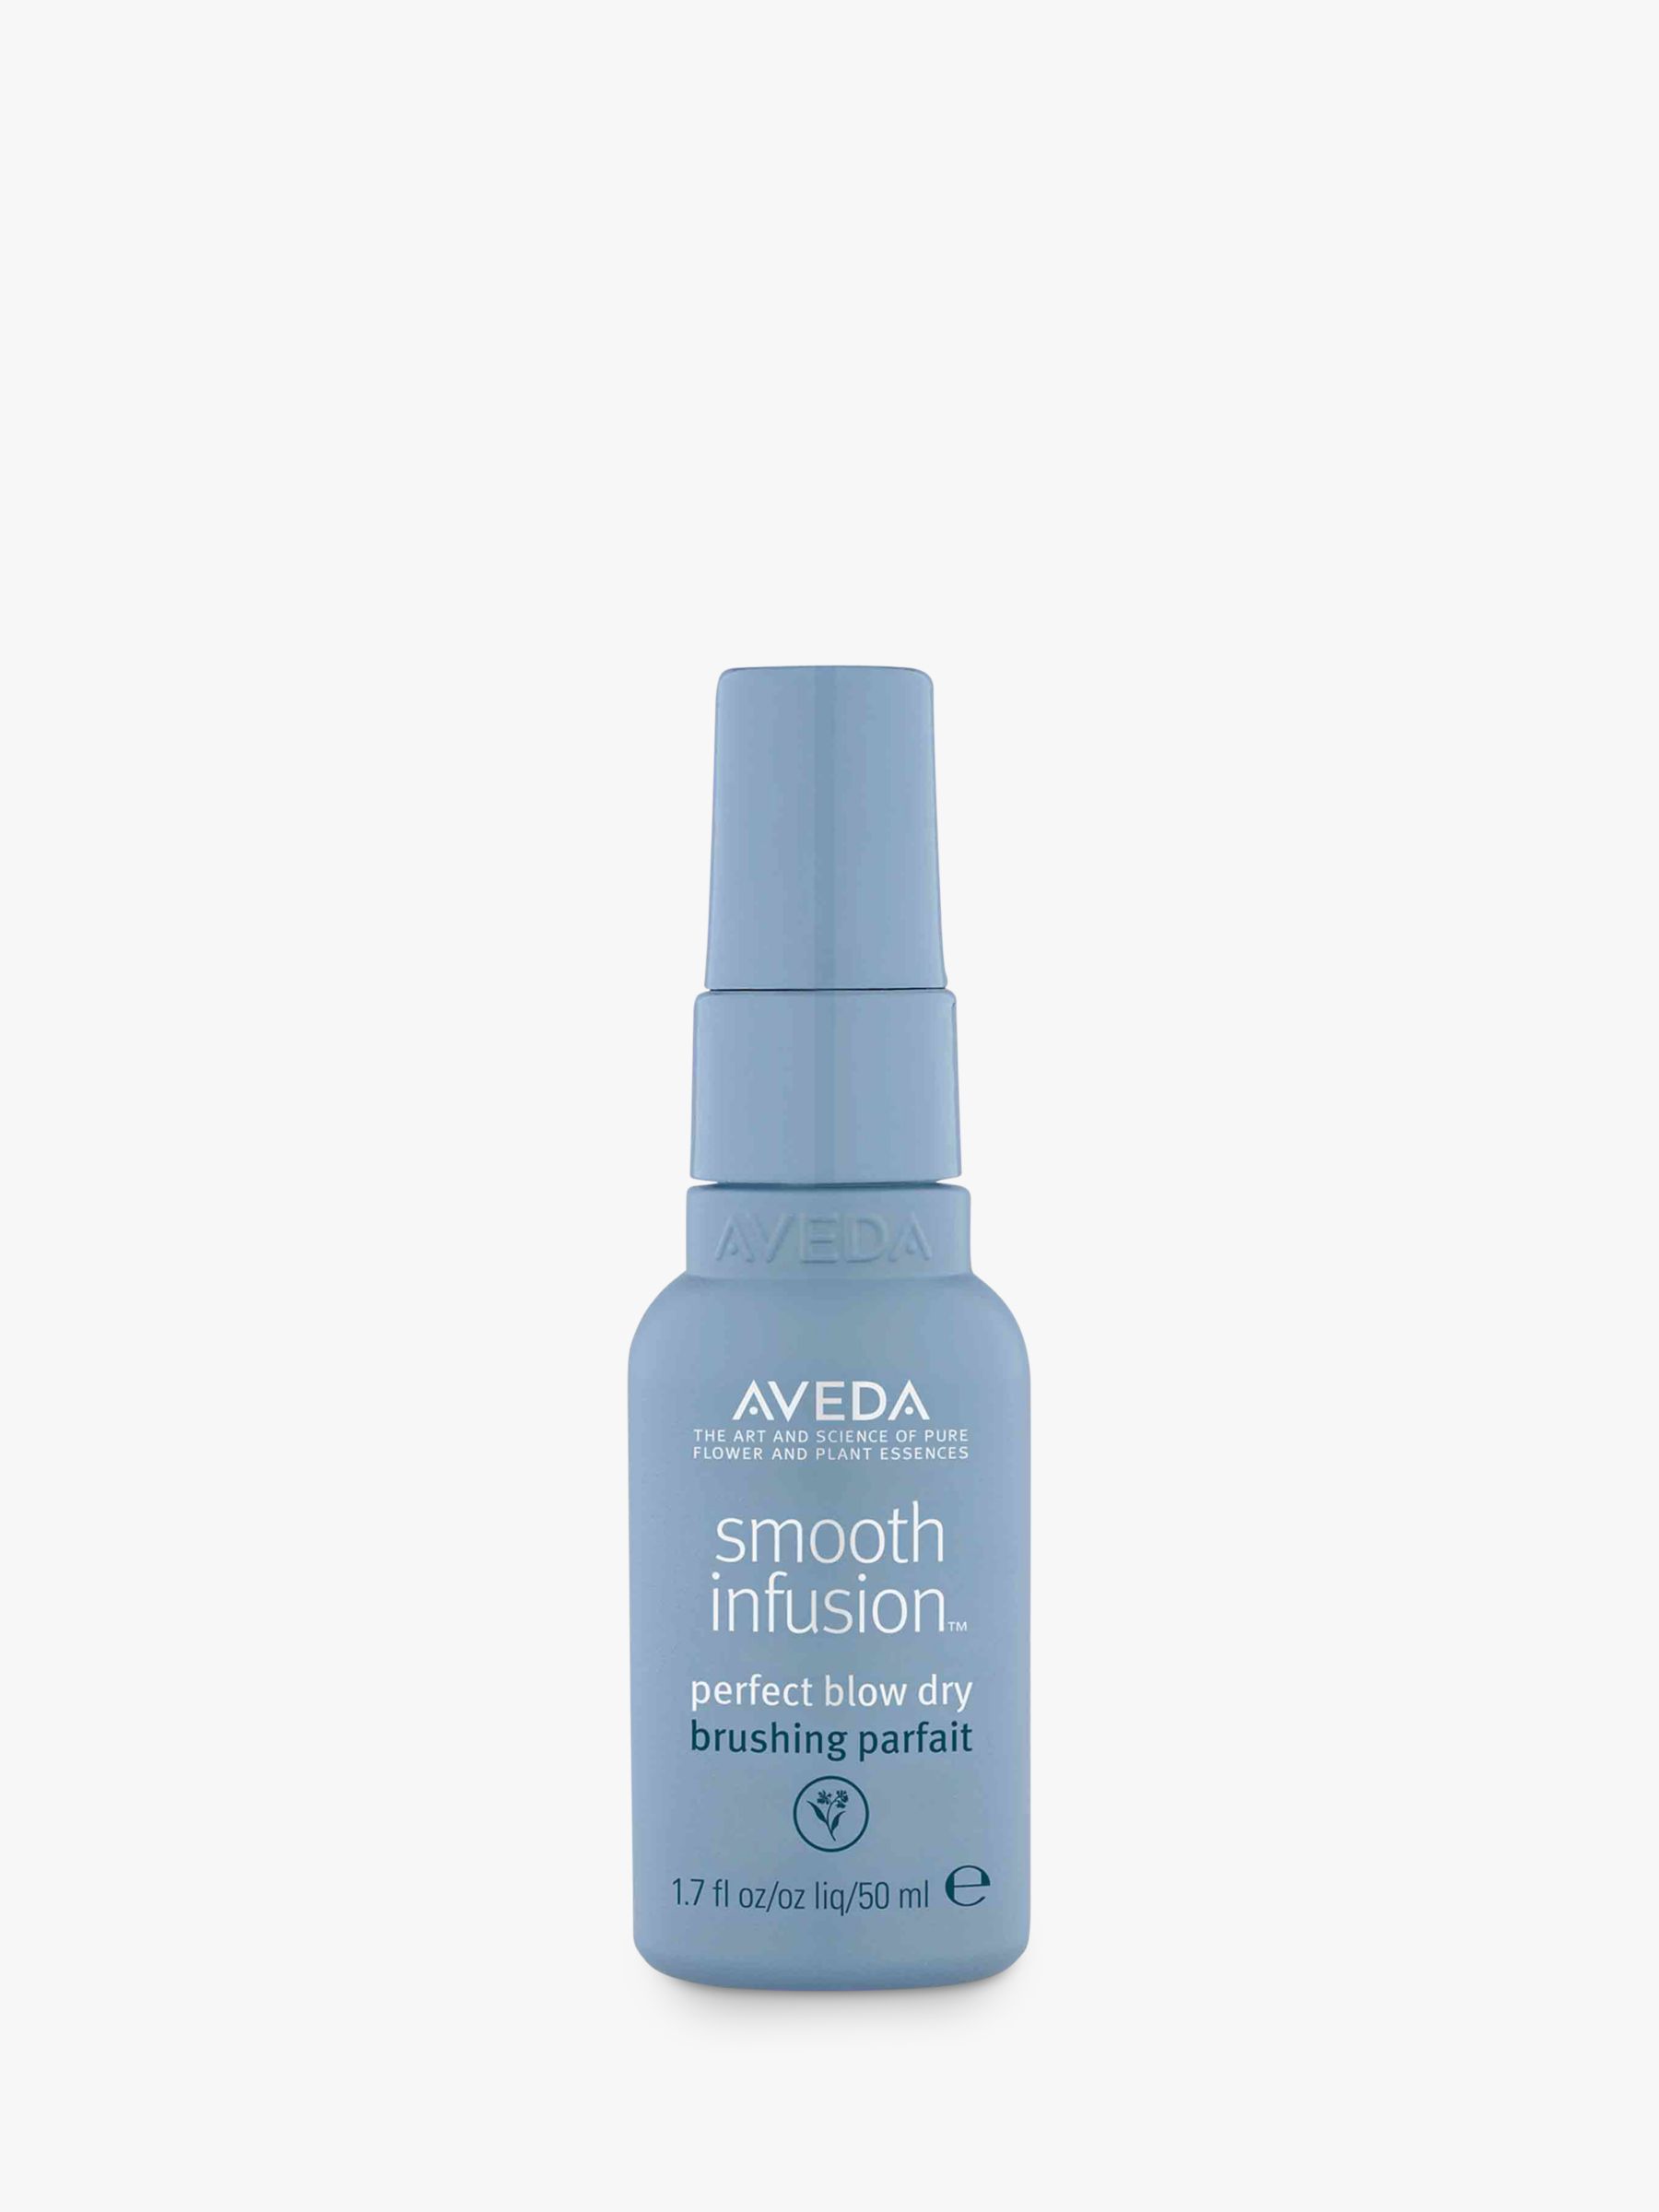 Aveda Smooth Infusion™ Perfect Blow Dry, 50ml at John Lewis & Partners